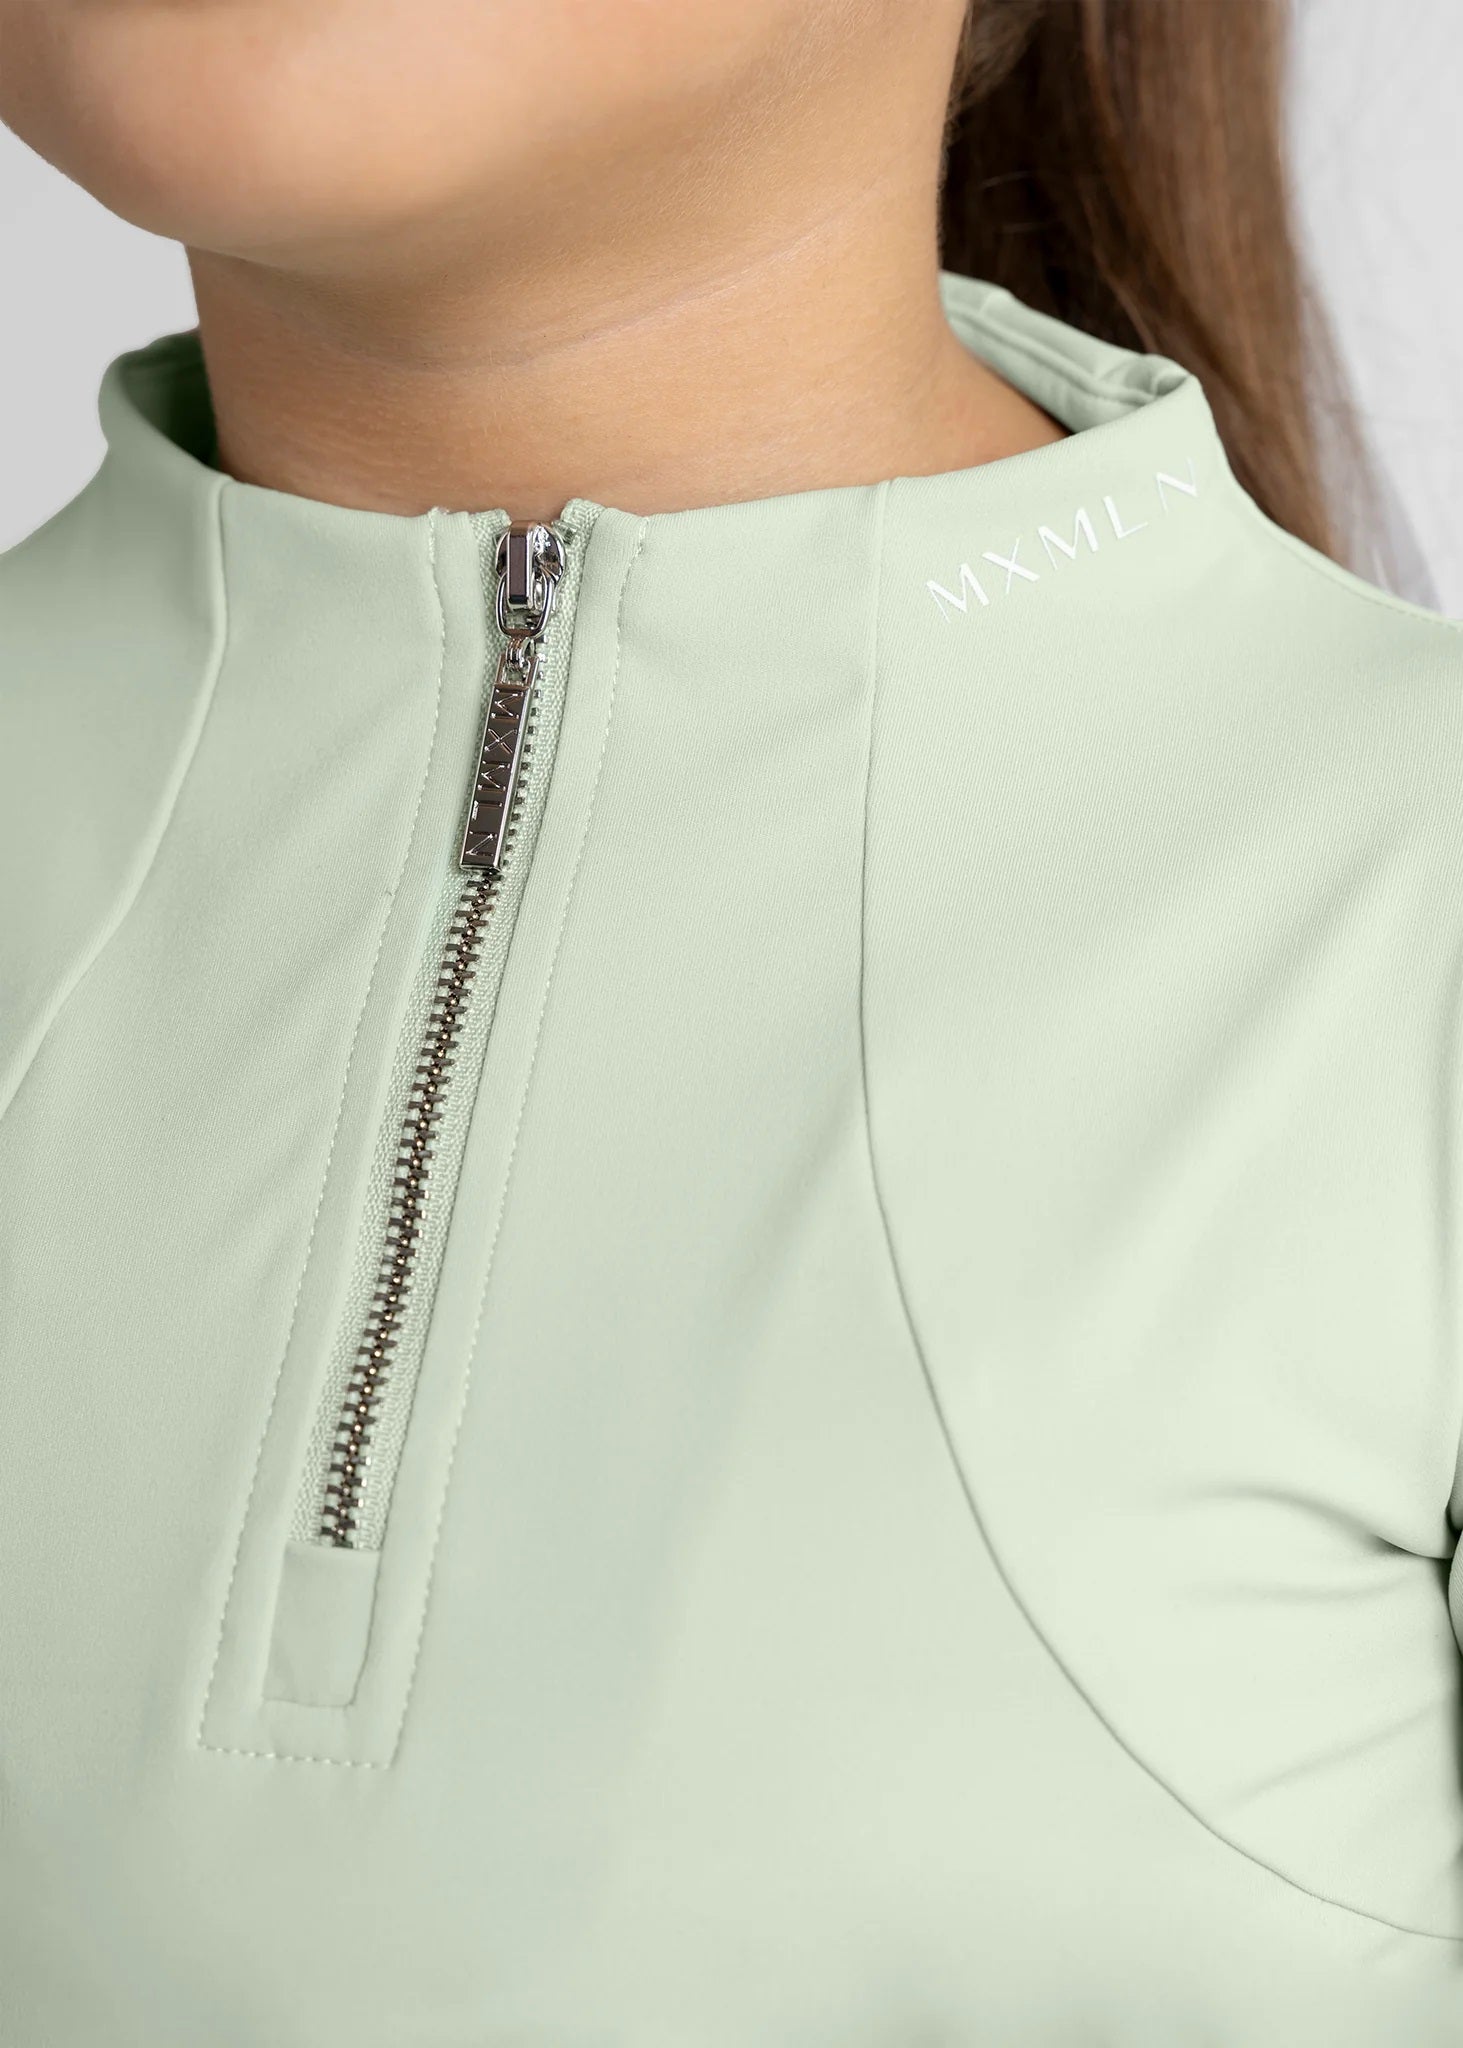 Young Riders - Long Sleeve Base Layer - Sage Green